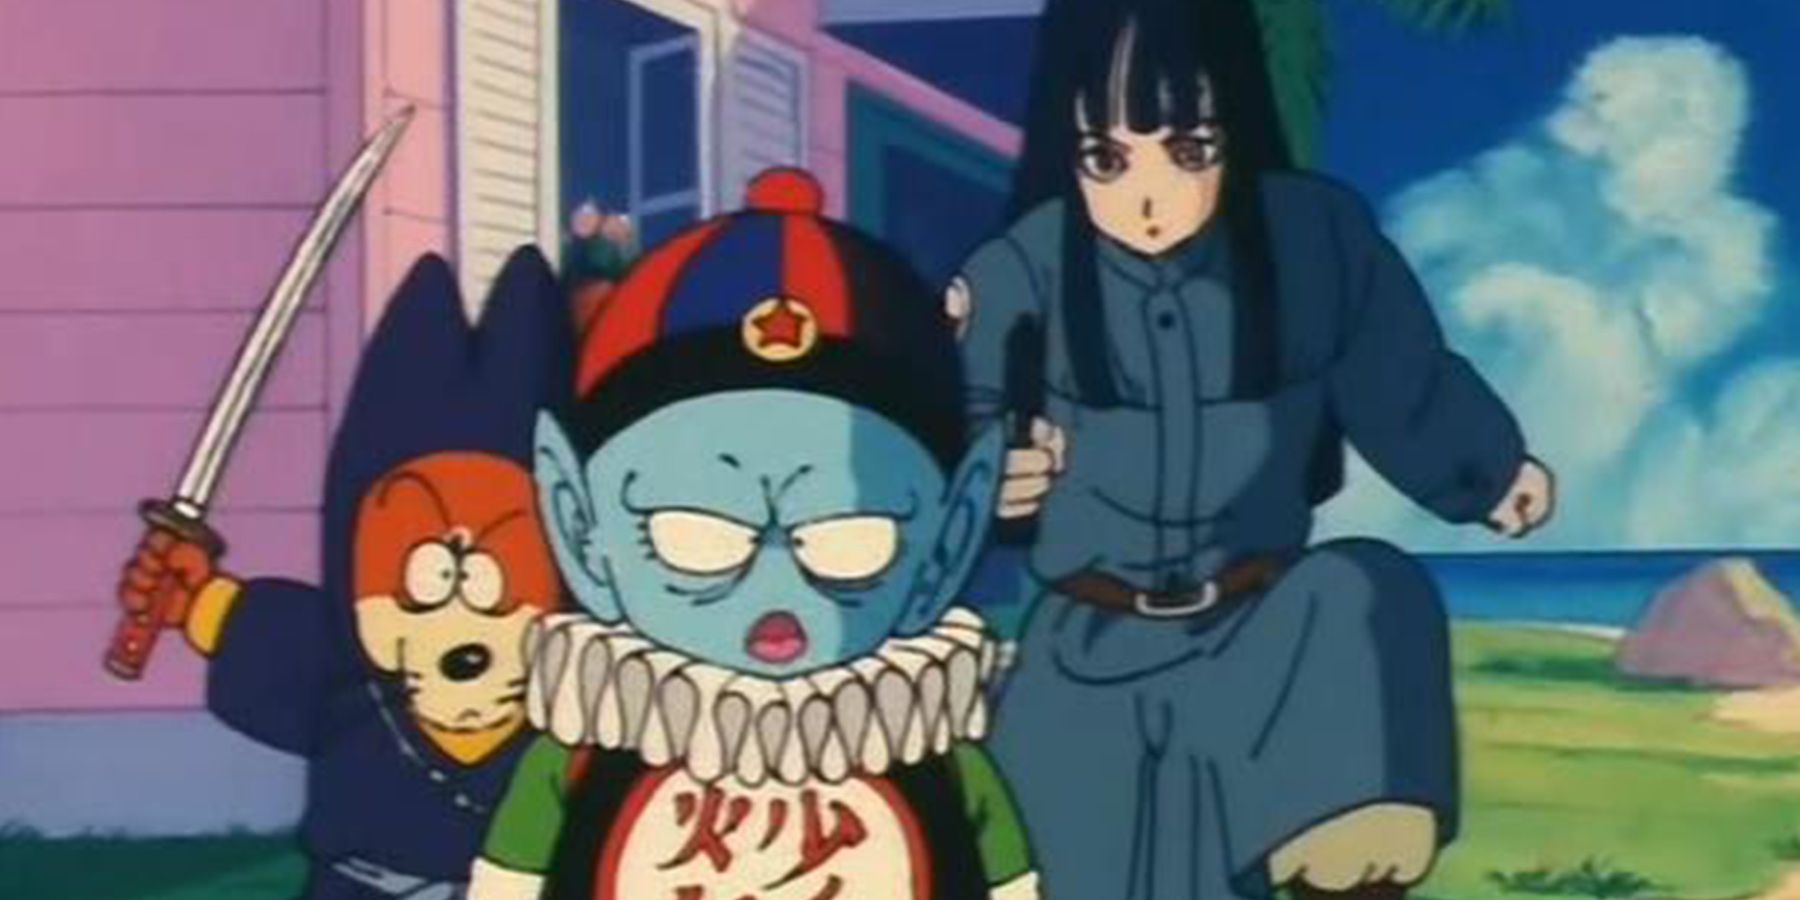 Pilaf with his subordinates in Dragon Ball.